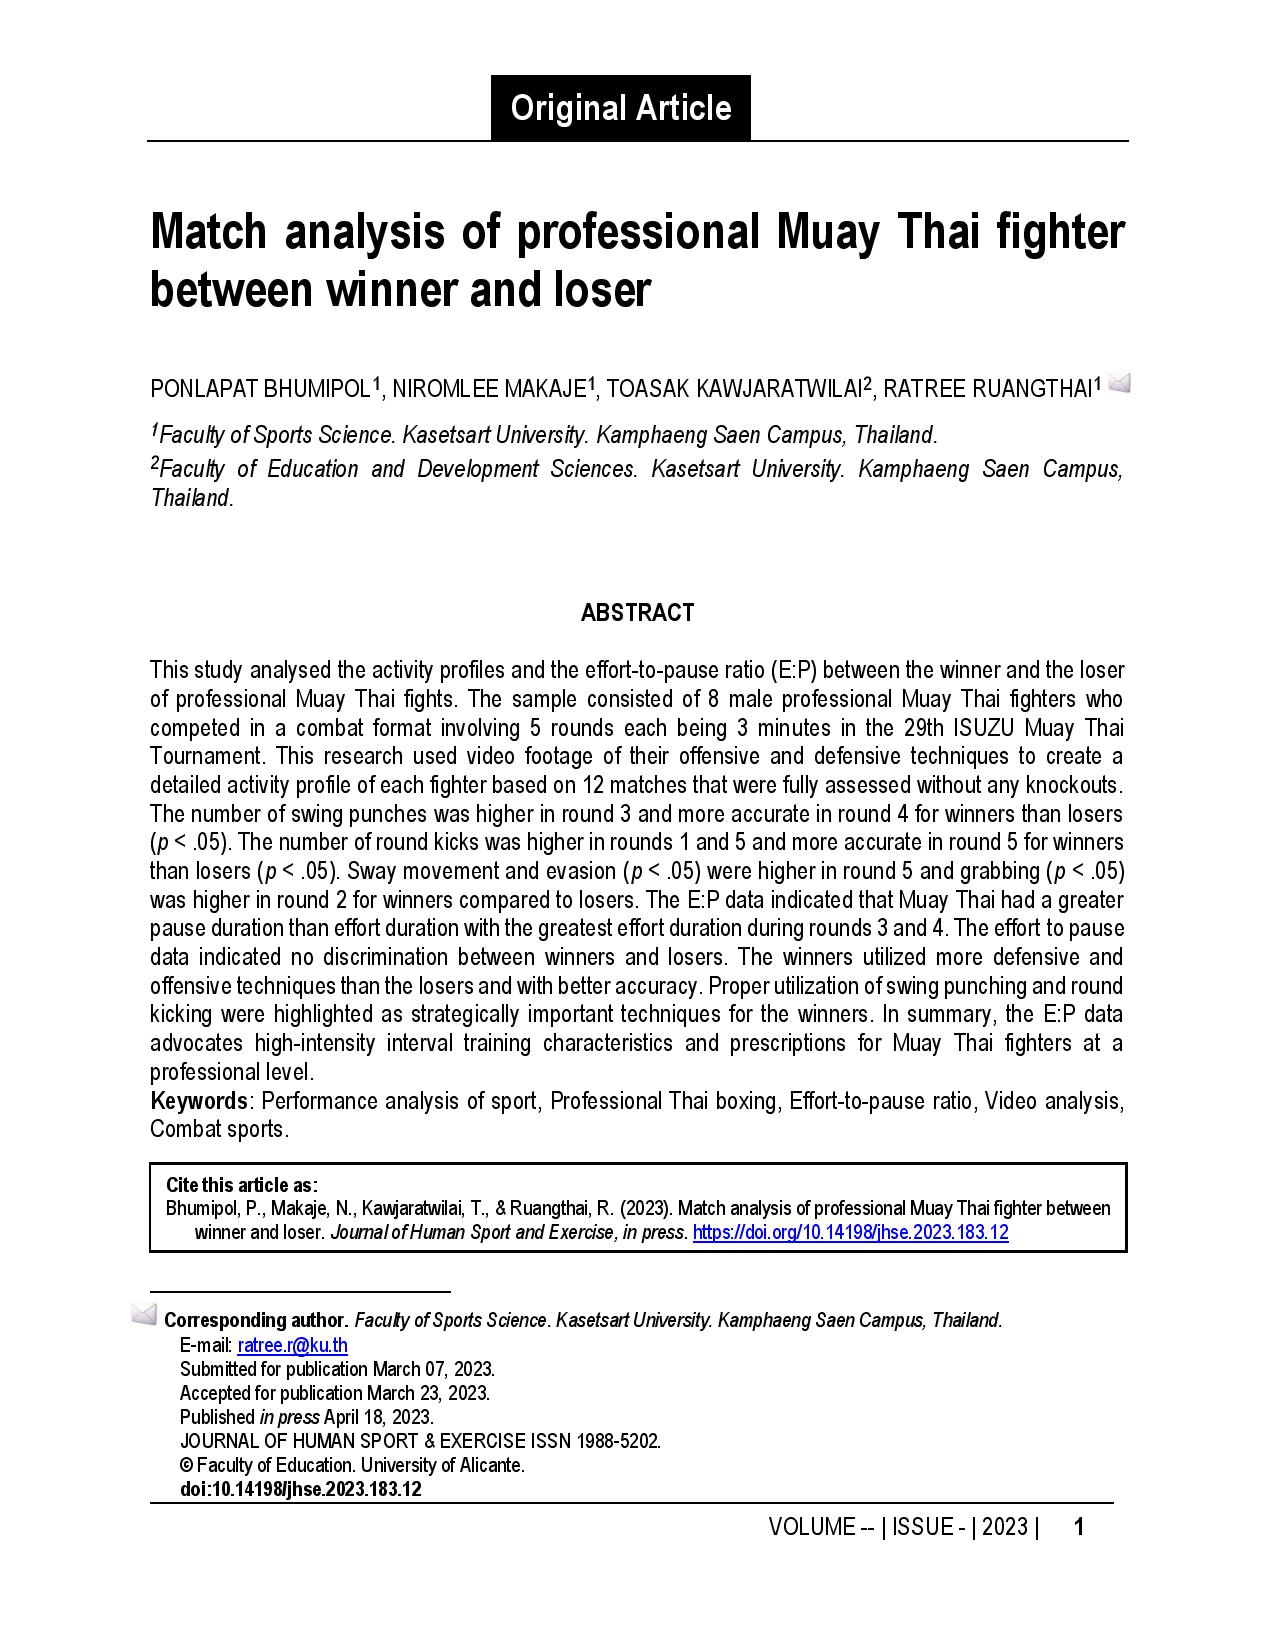 Match analysis of professional Muay Thai fighter between winner and loser